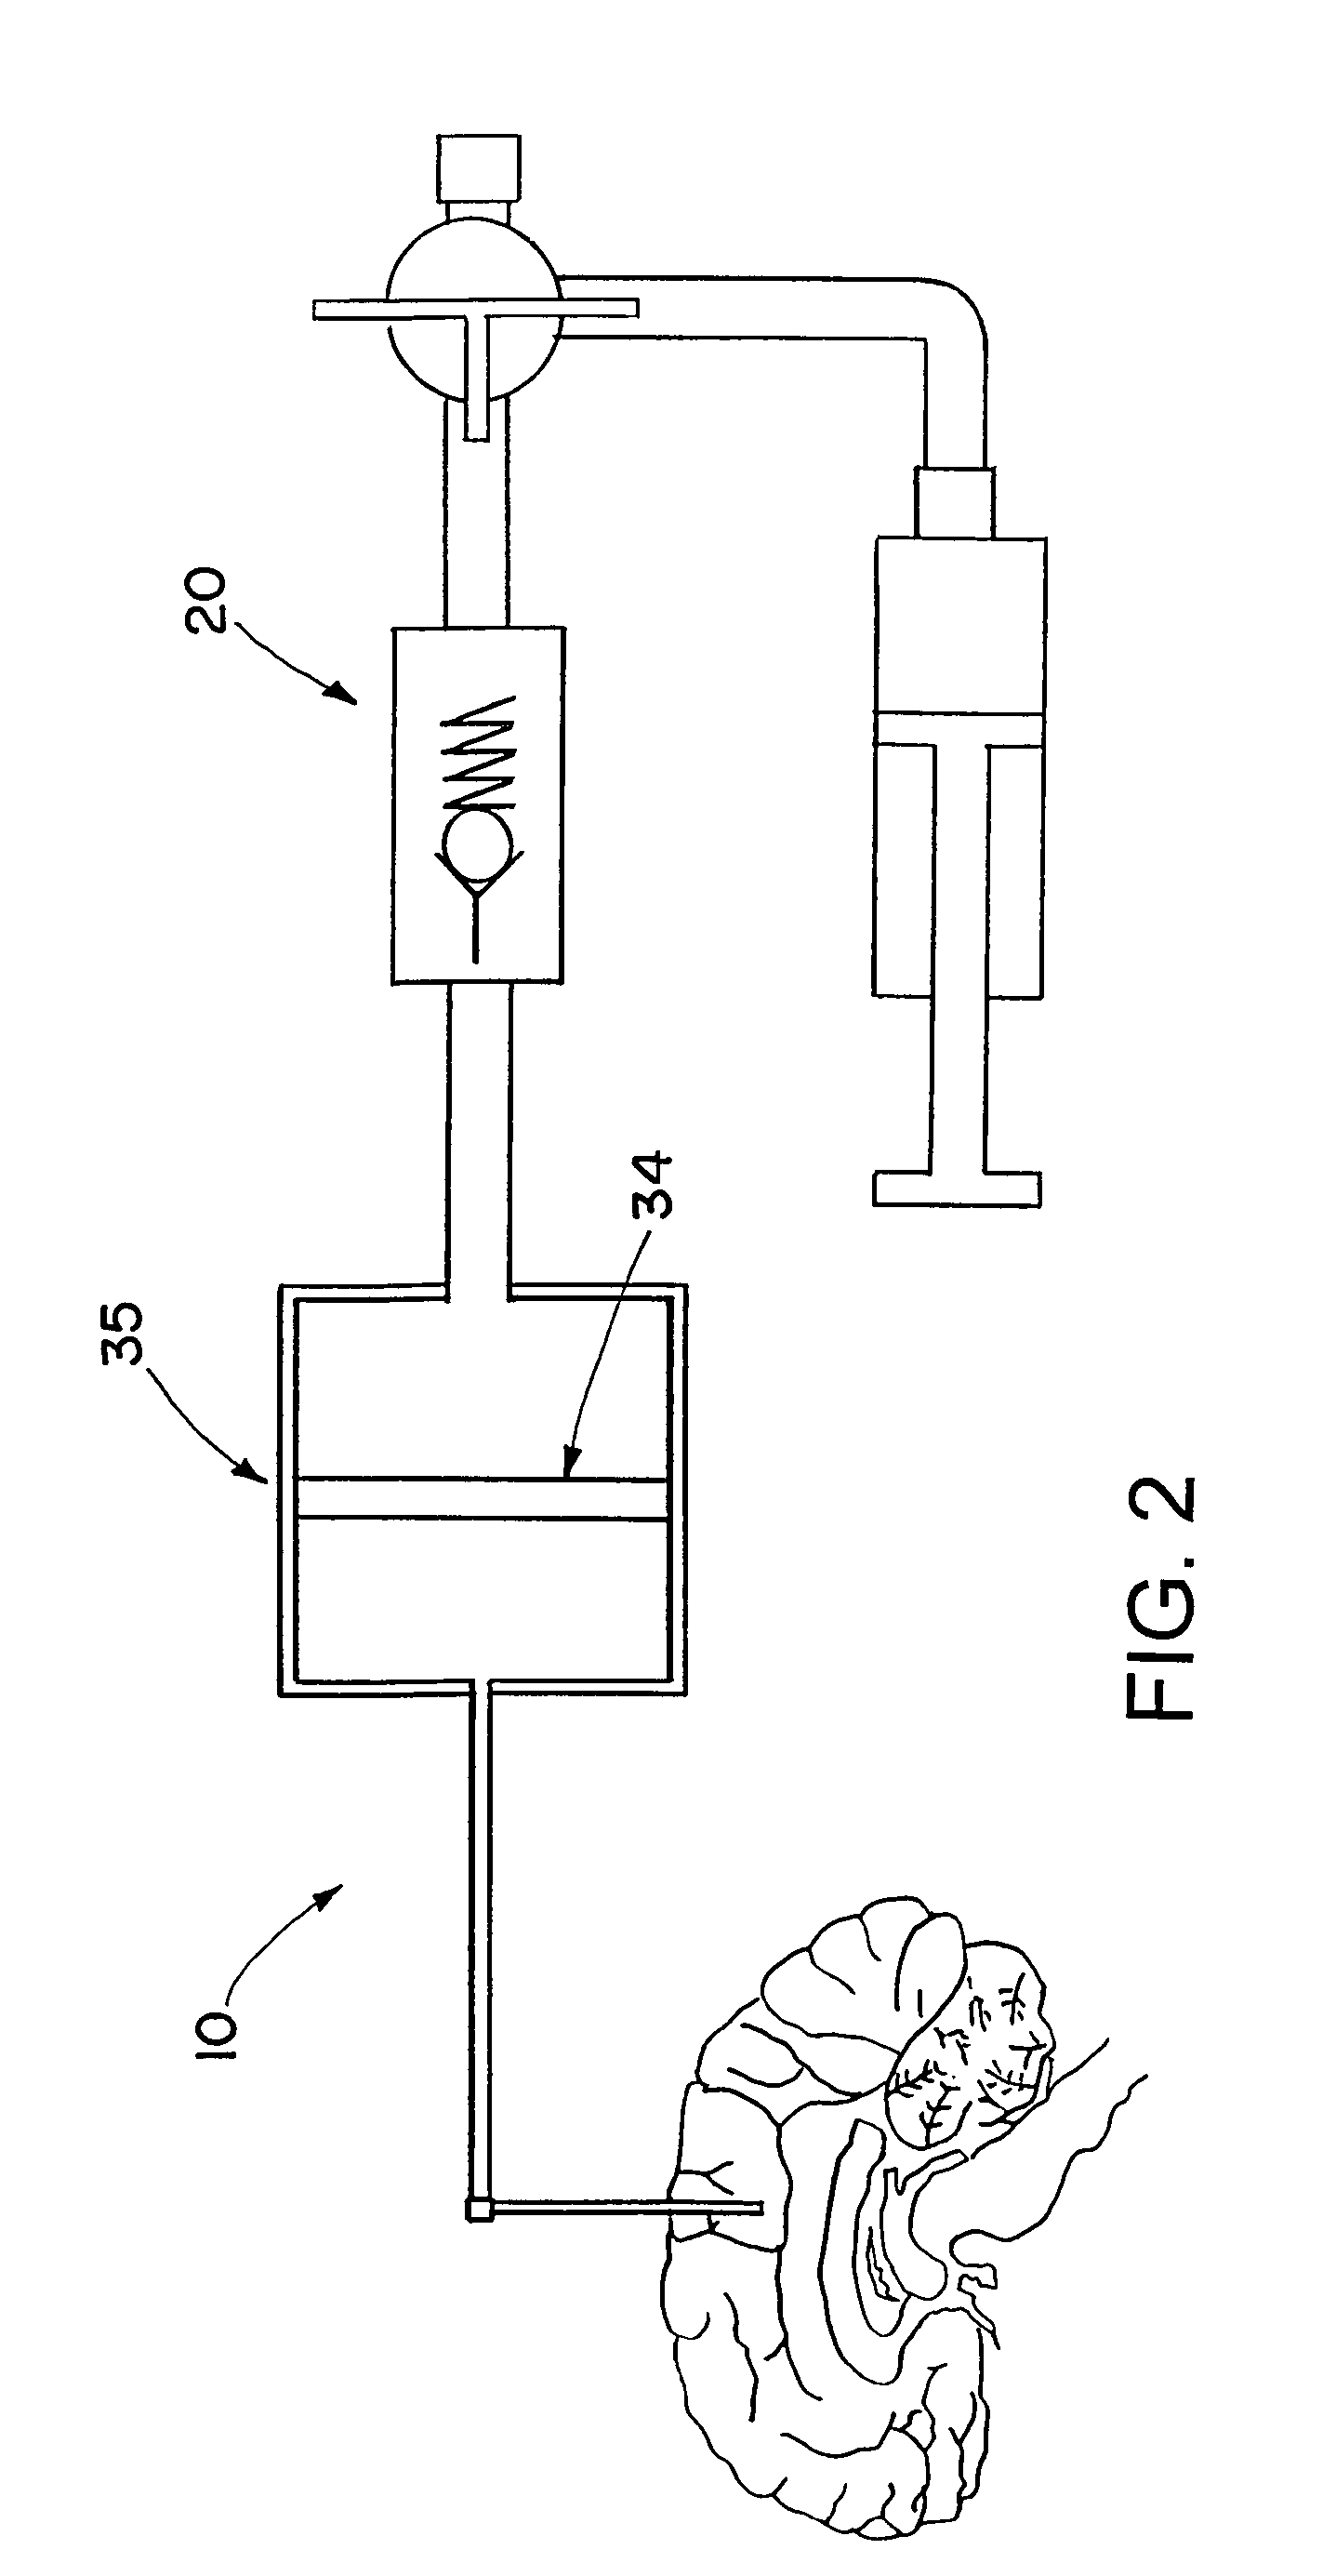 Drug supply system for CED (convection-enhanced delivery) catheter infusions